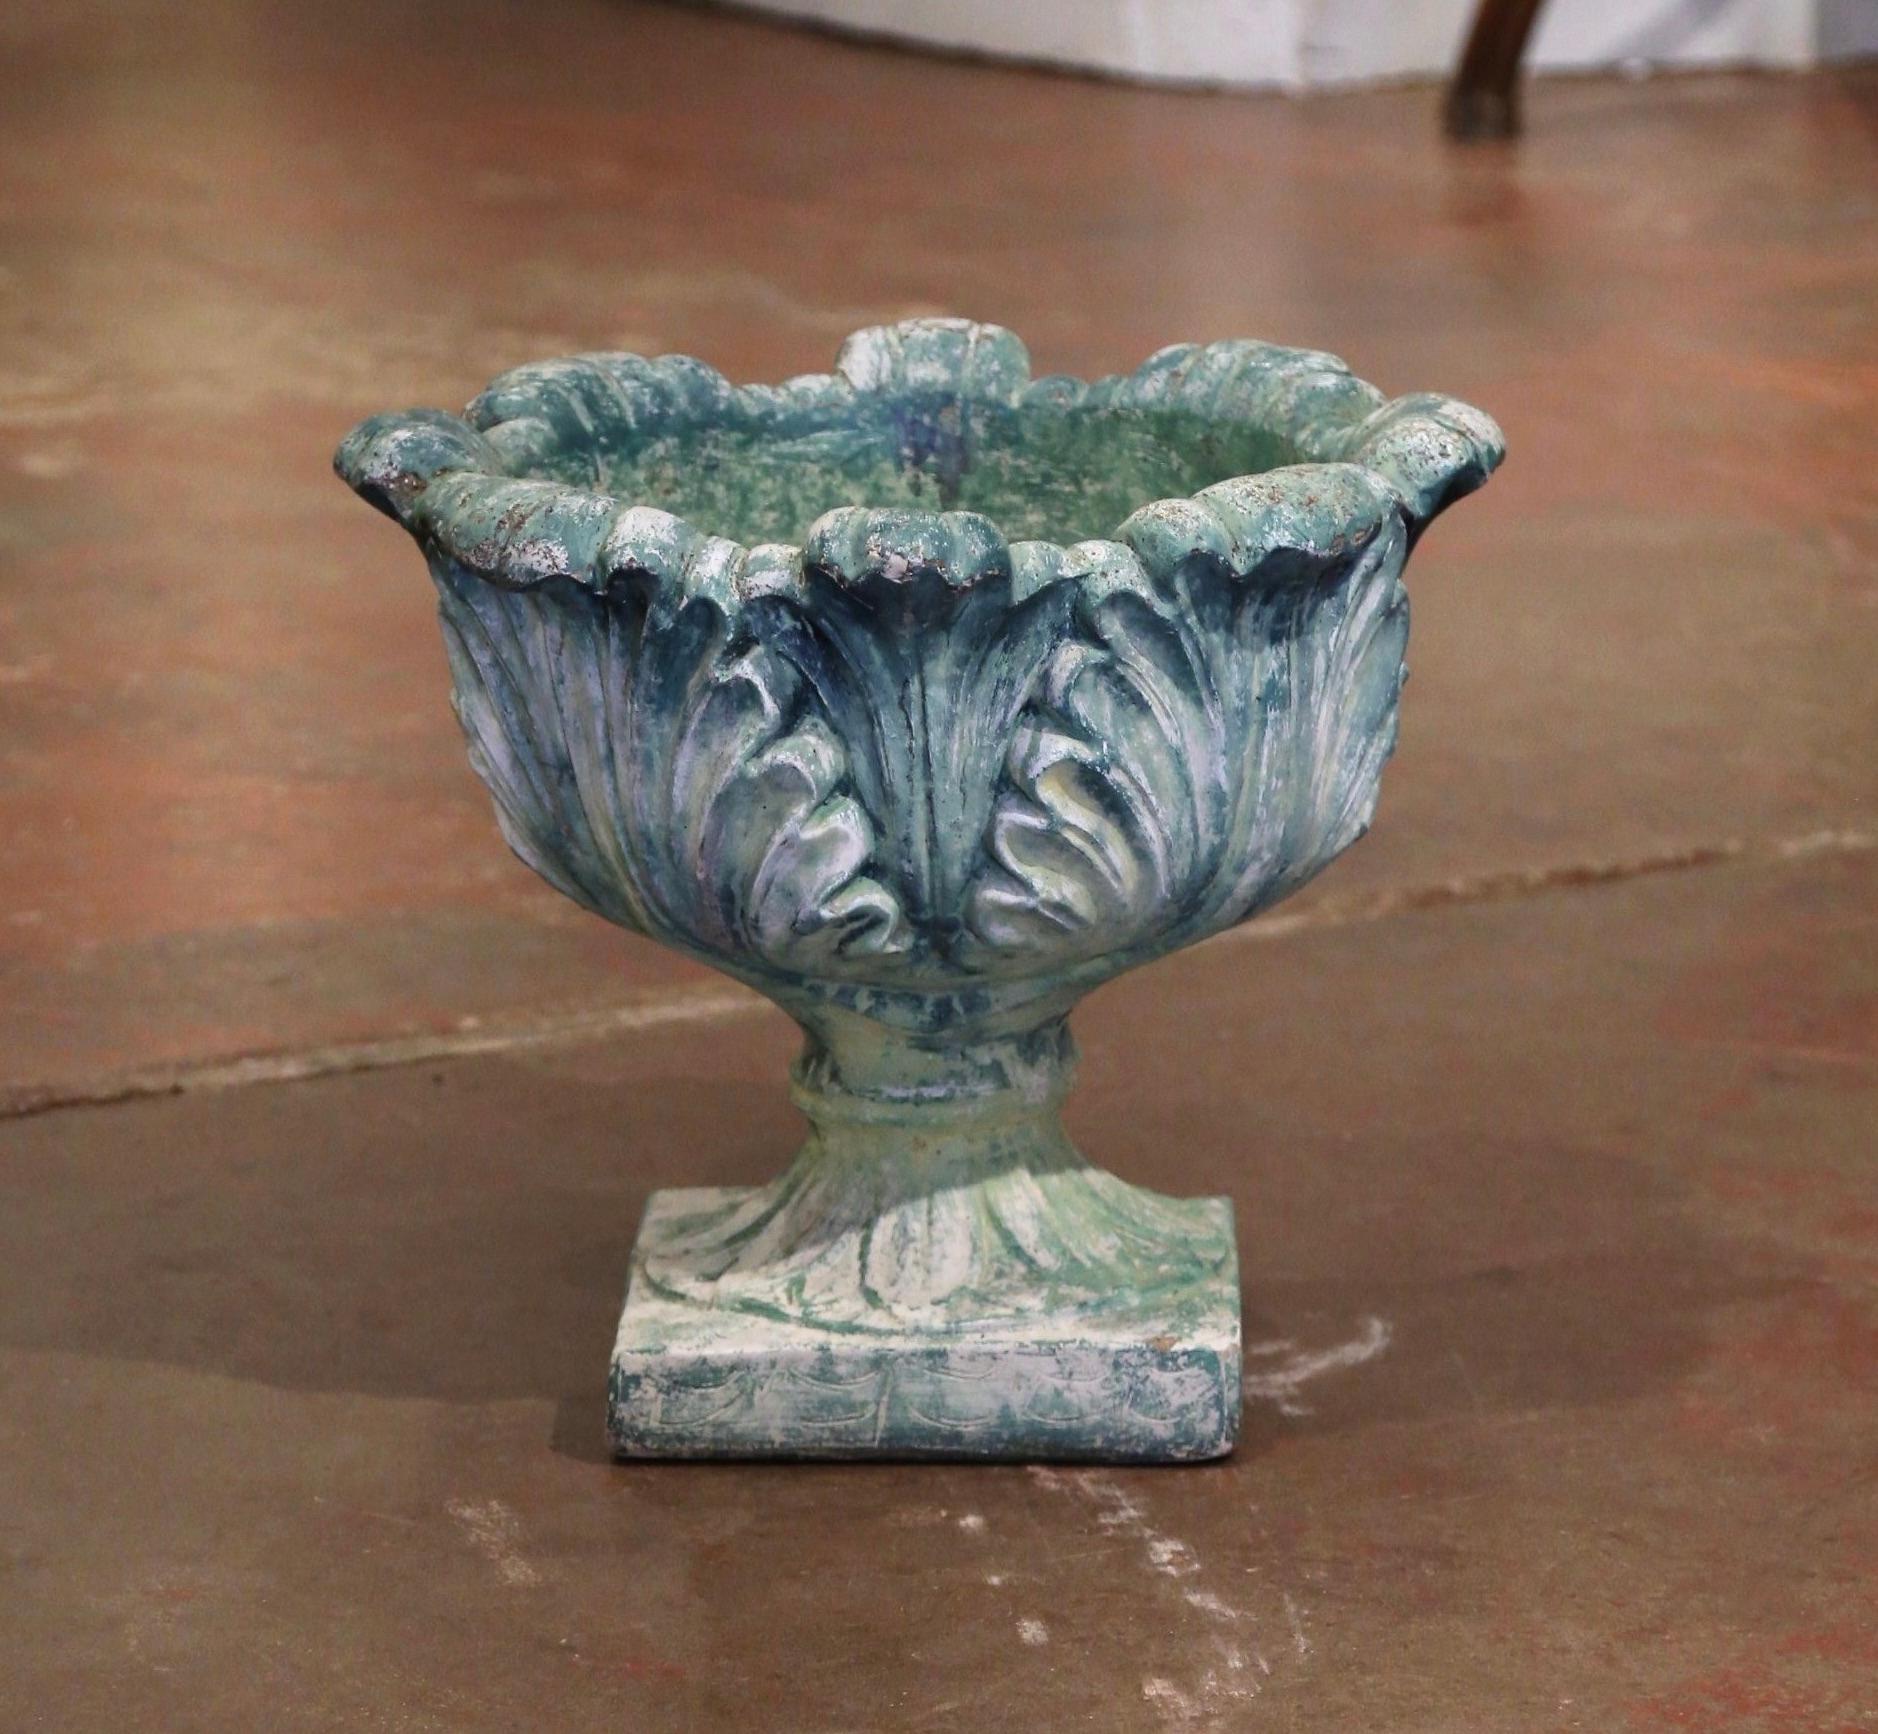 Place this elegant antique planter on your patio for a timeless flower display. Crafted circa 1920, the large, sturdy stone jardinière sits on a solid square base and features a wide carved urn embellished with acanthus leaf motifs over a scalloped